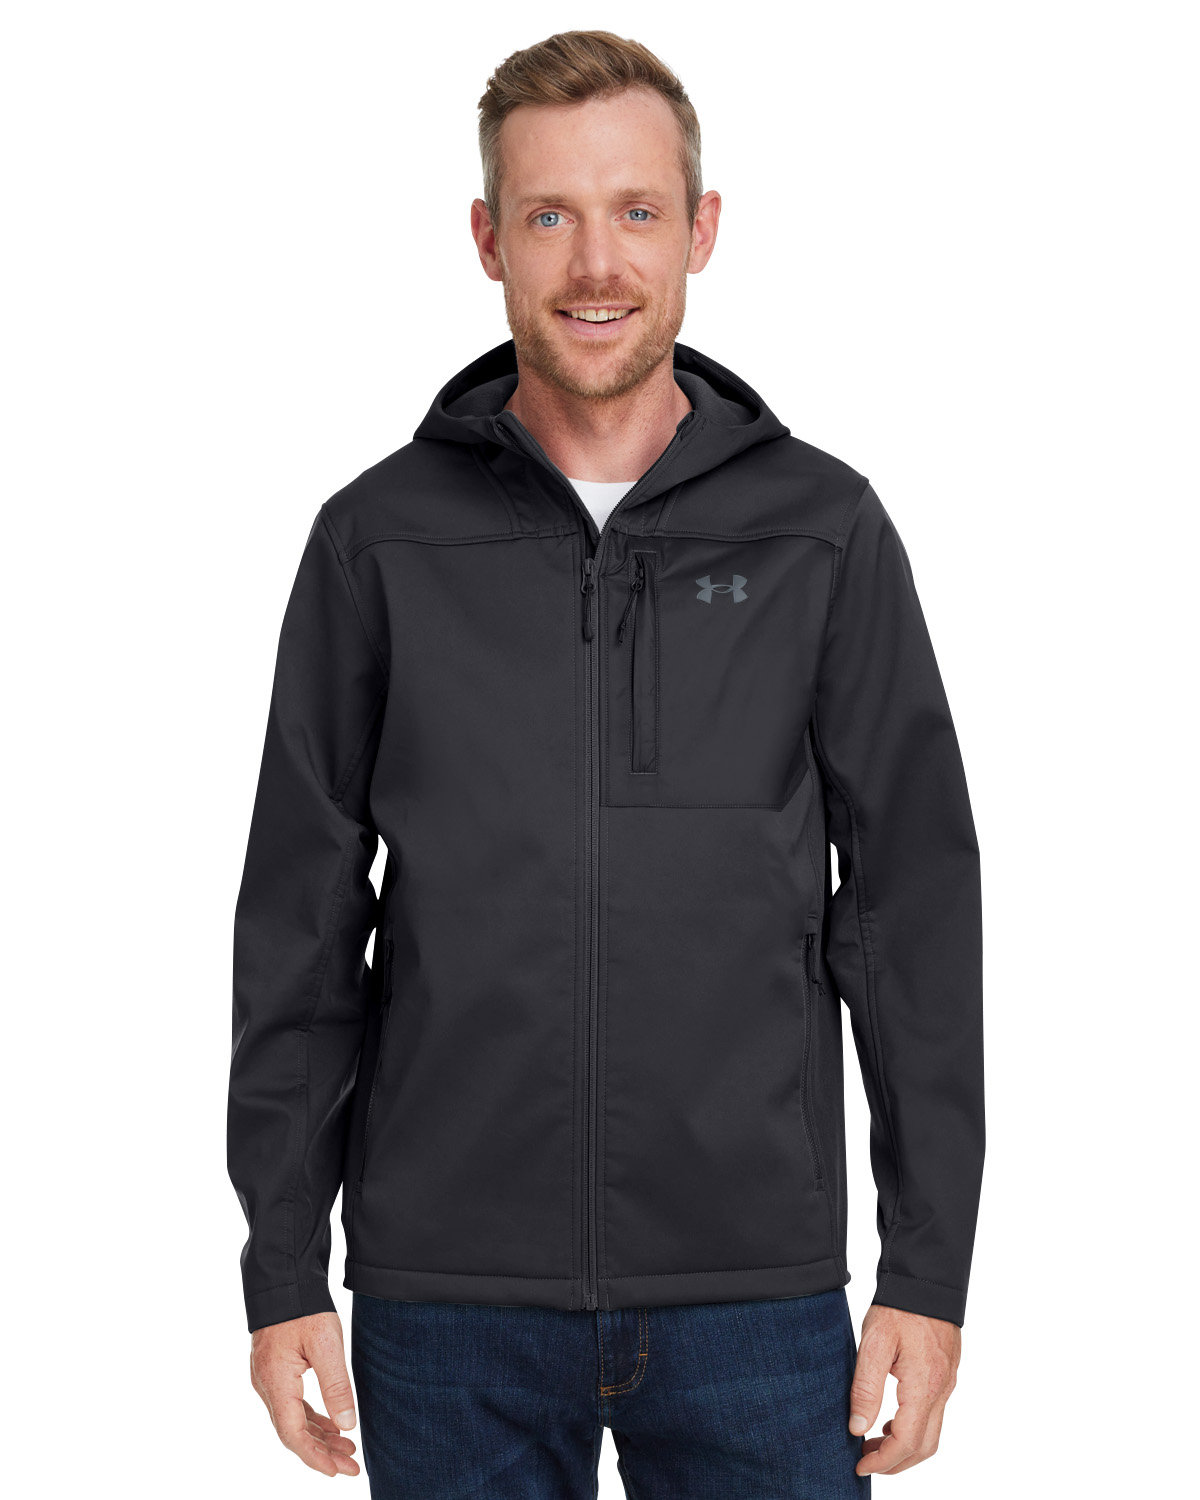 Buy Mens Cgi Shield 2.0 Hooded Jacket - Under Armour Online at Best ...